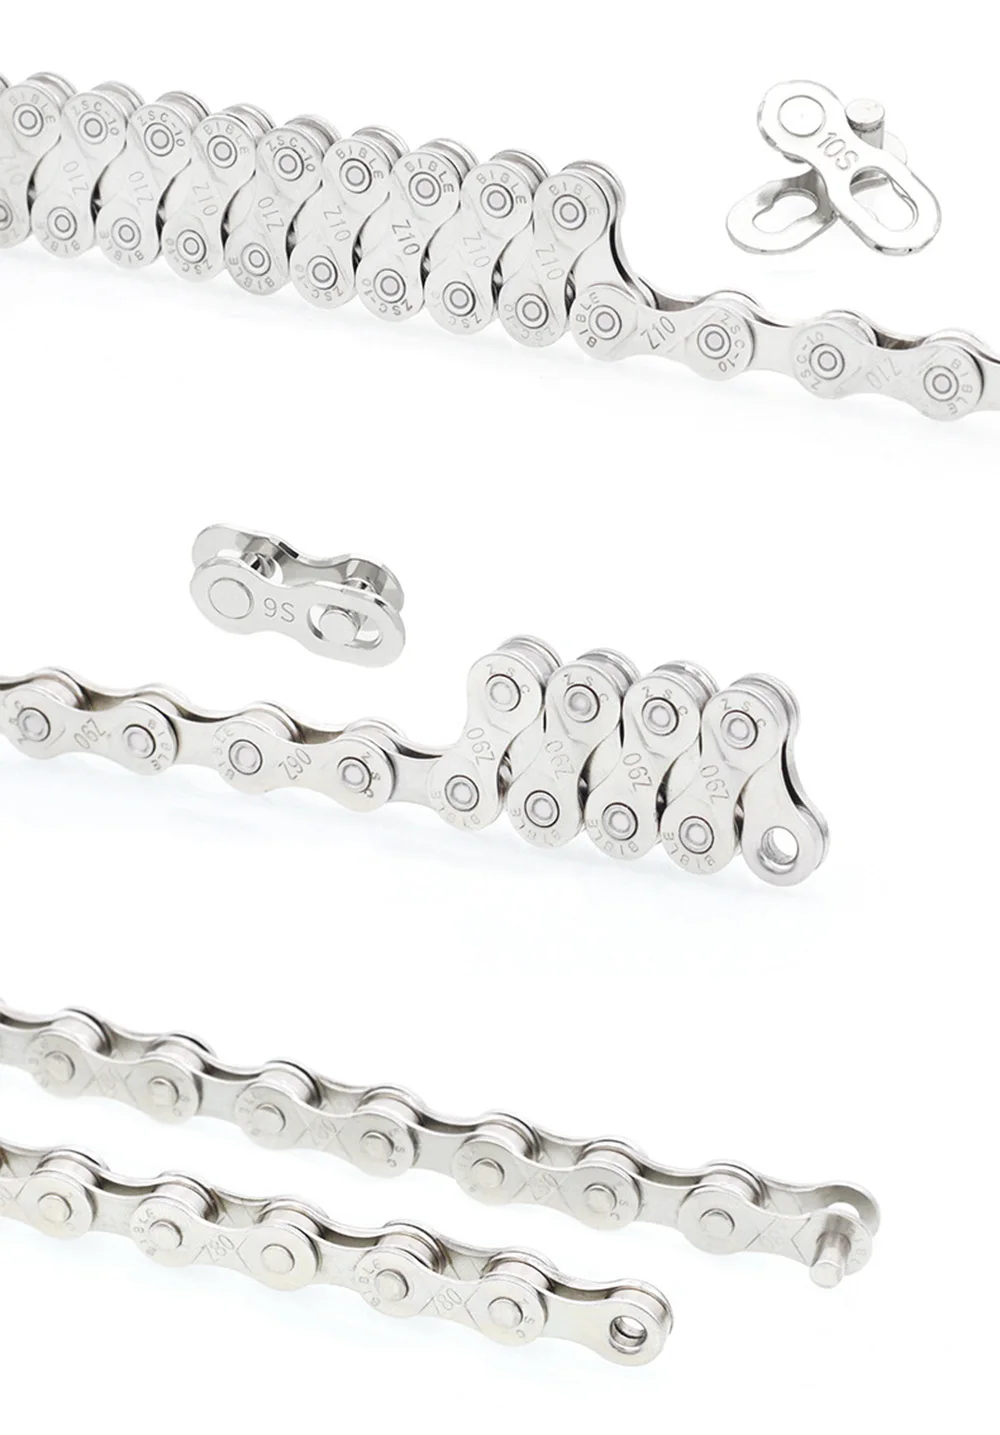 6 7 8 9 10 11 Speed Bicycle Chain 116 Links MTB Mountain Road Bike Stainless Steel Chains Plating Cycling Accessories BC0577 (10)